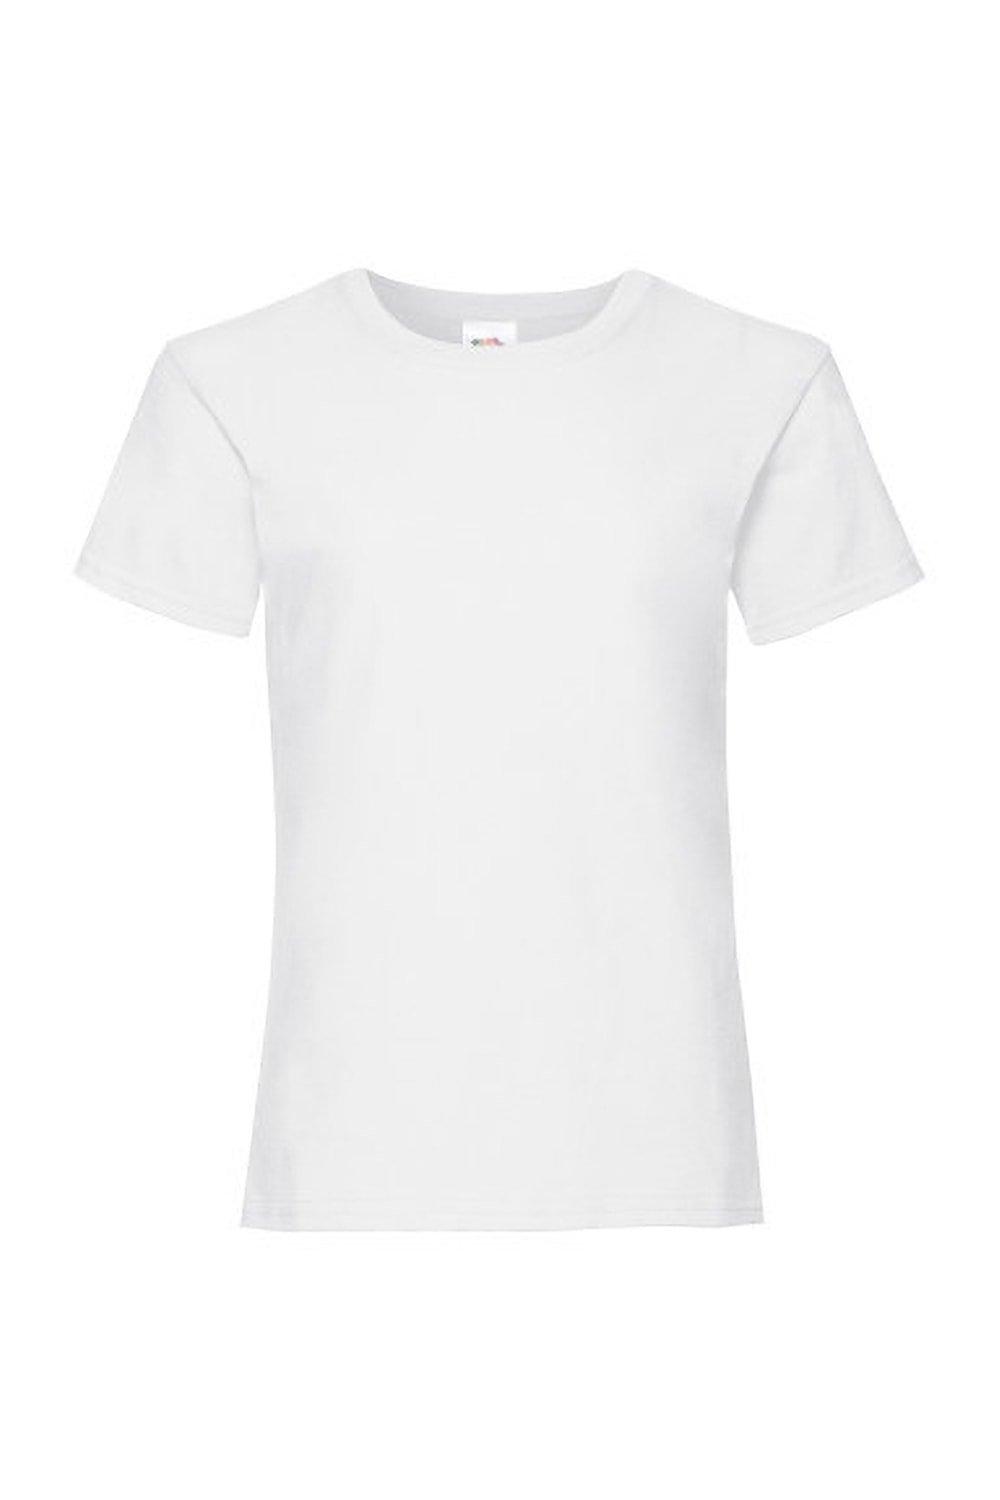 Valueweight Short Sleeve T-Shirt (Pack of 2)